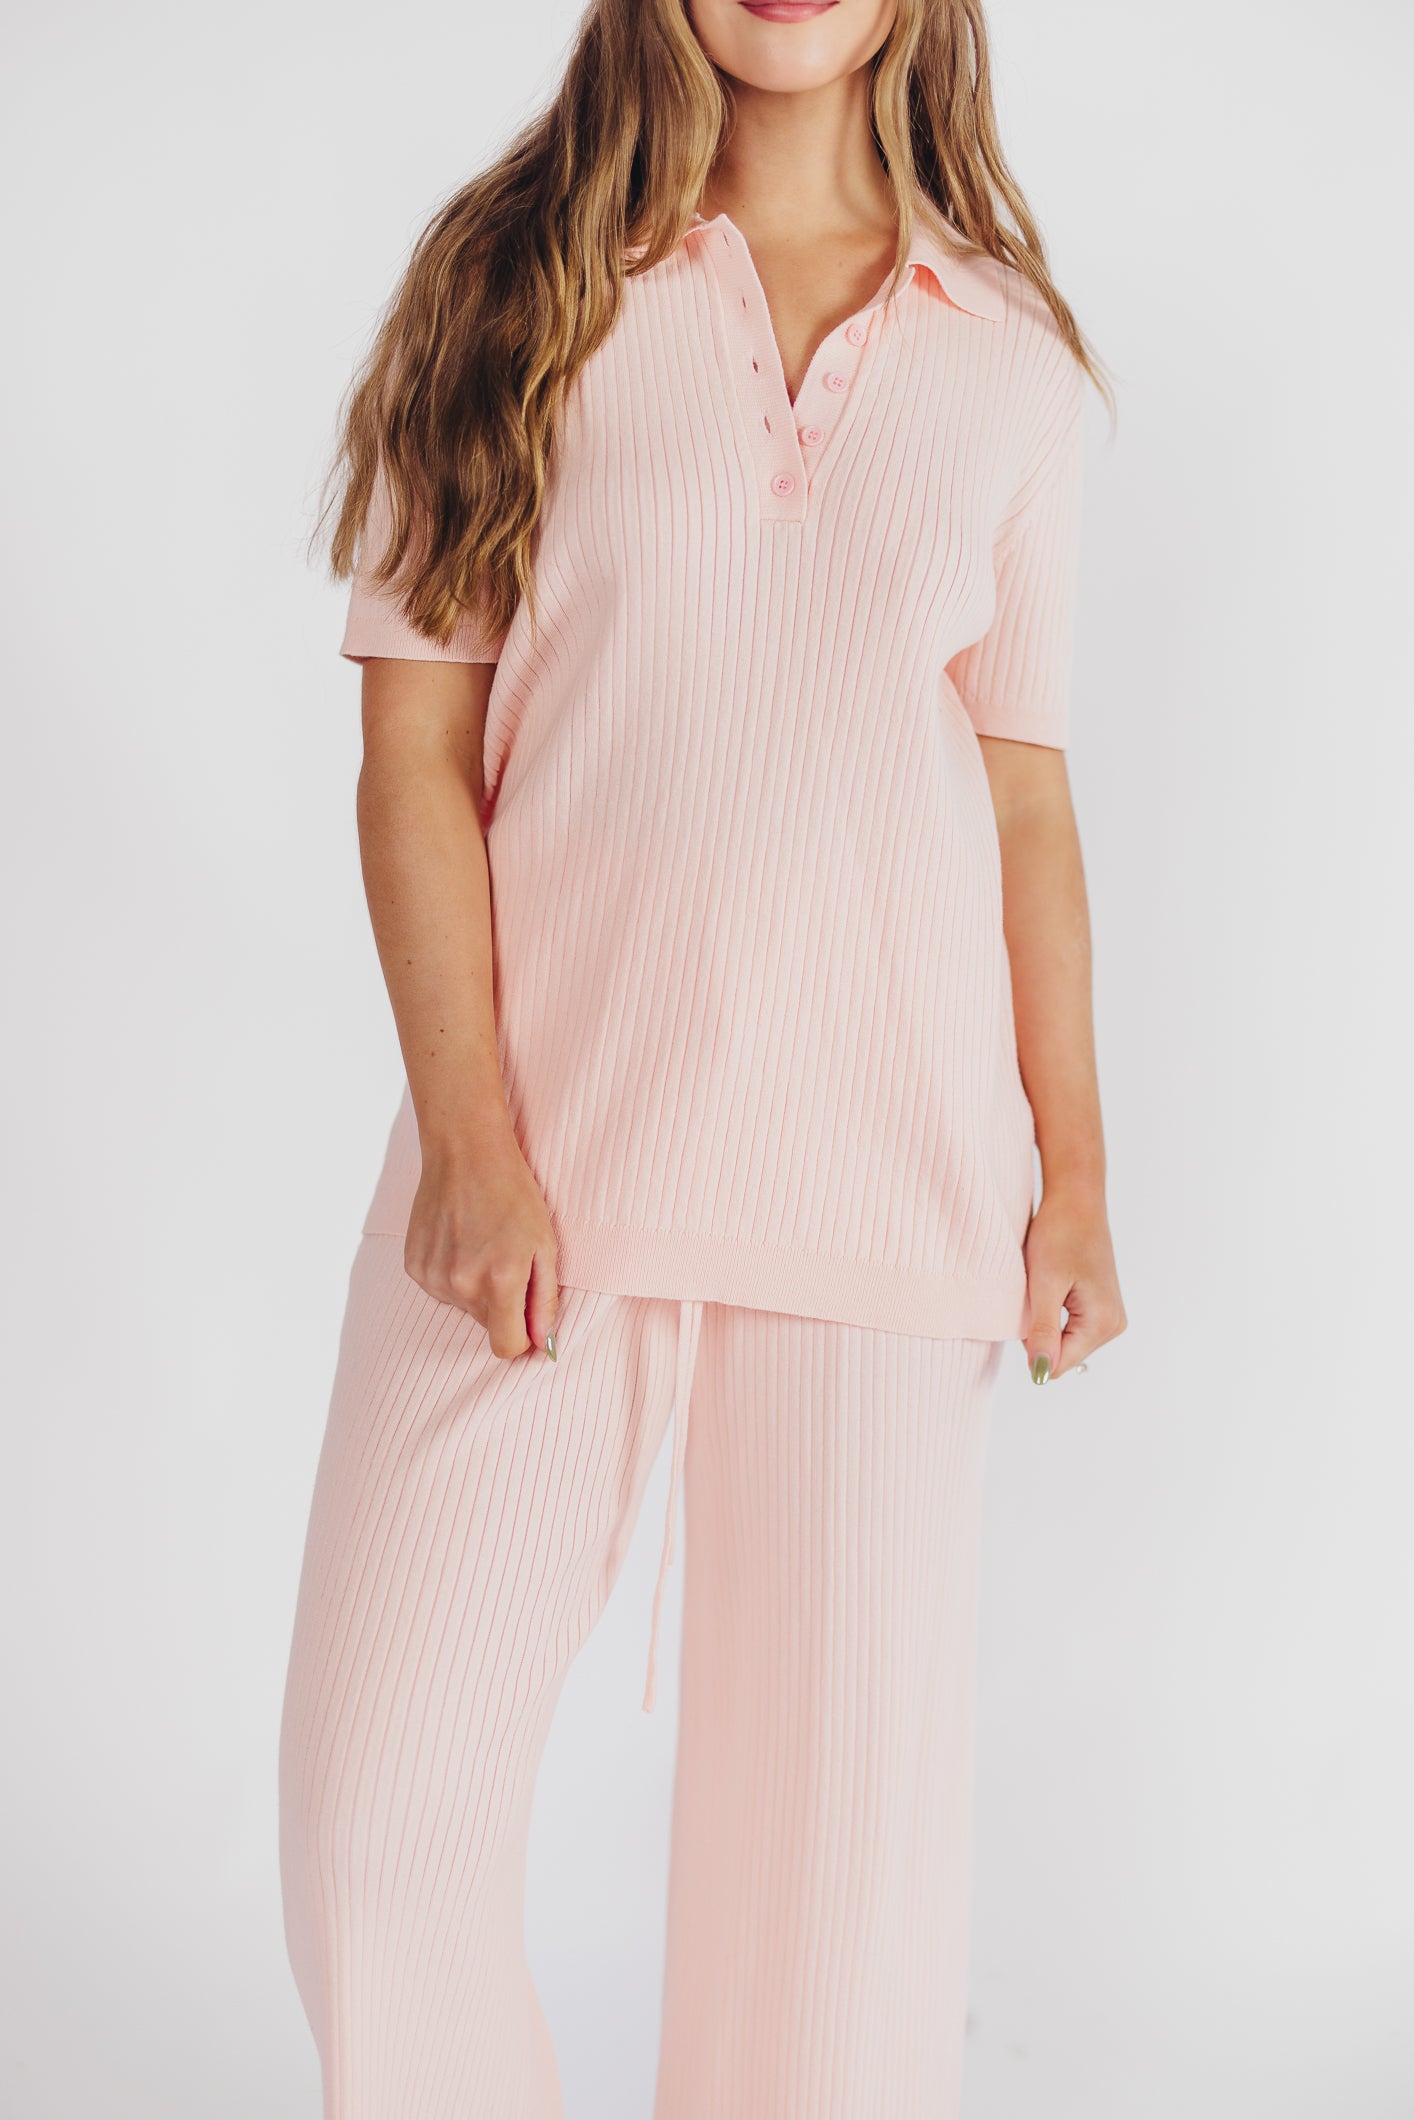 Petra Collared Top in Soft Pink